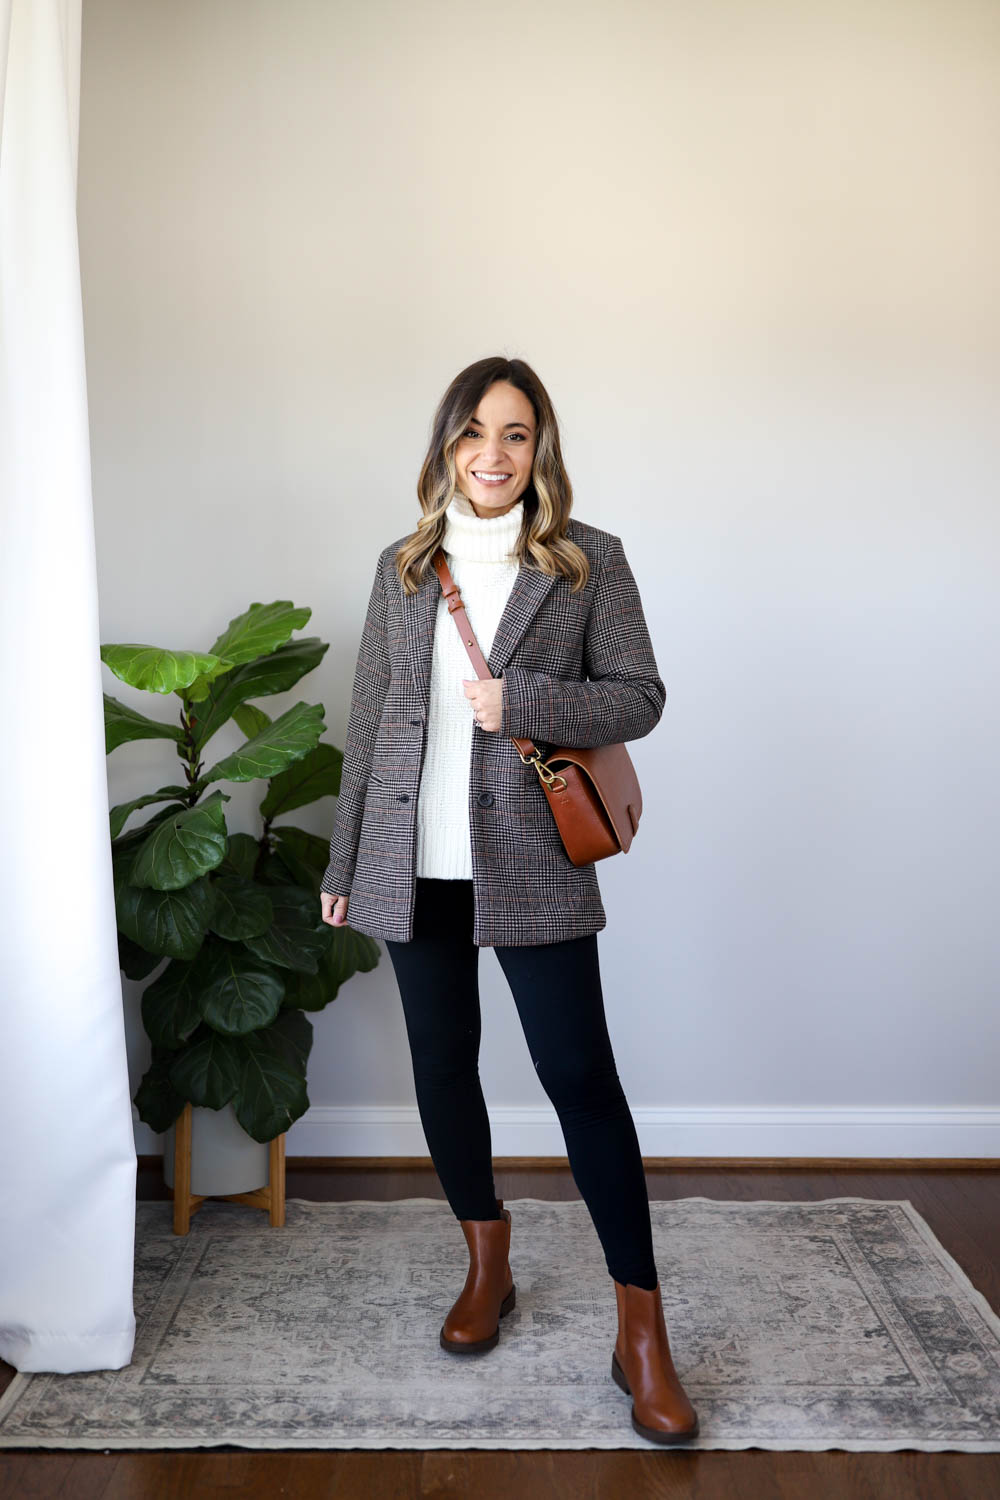 Fall Boots Series: Outfits for Work with Boots - Pumps & Push Ups